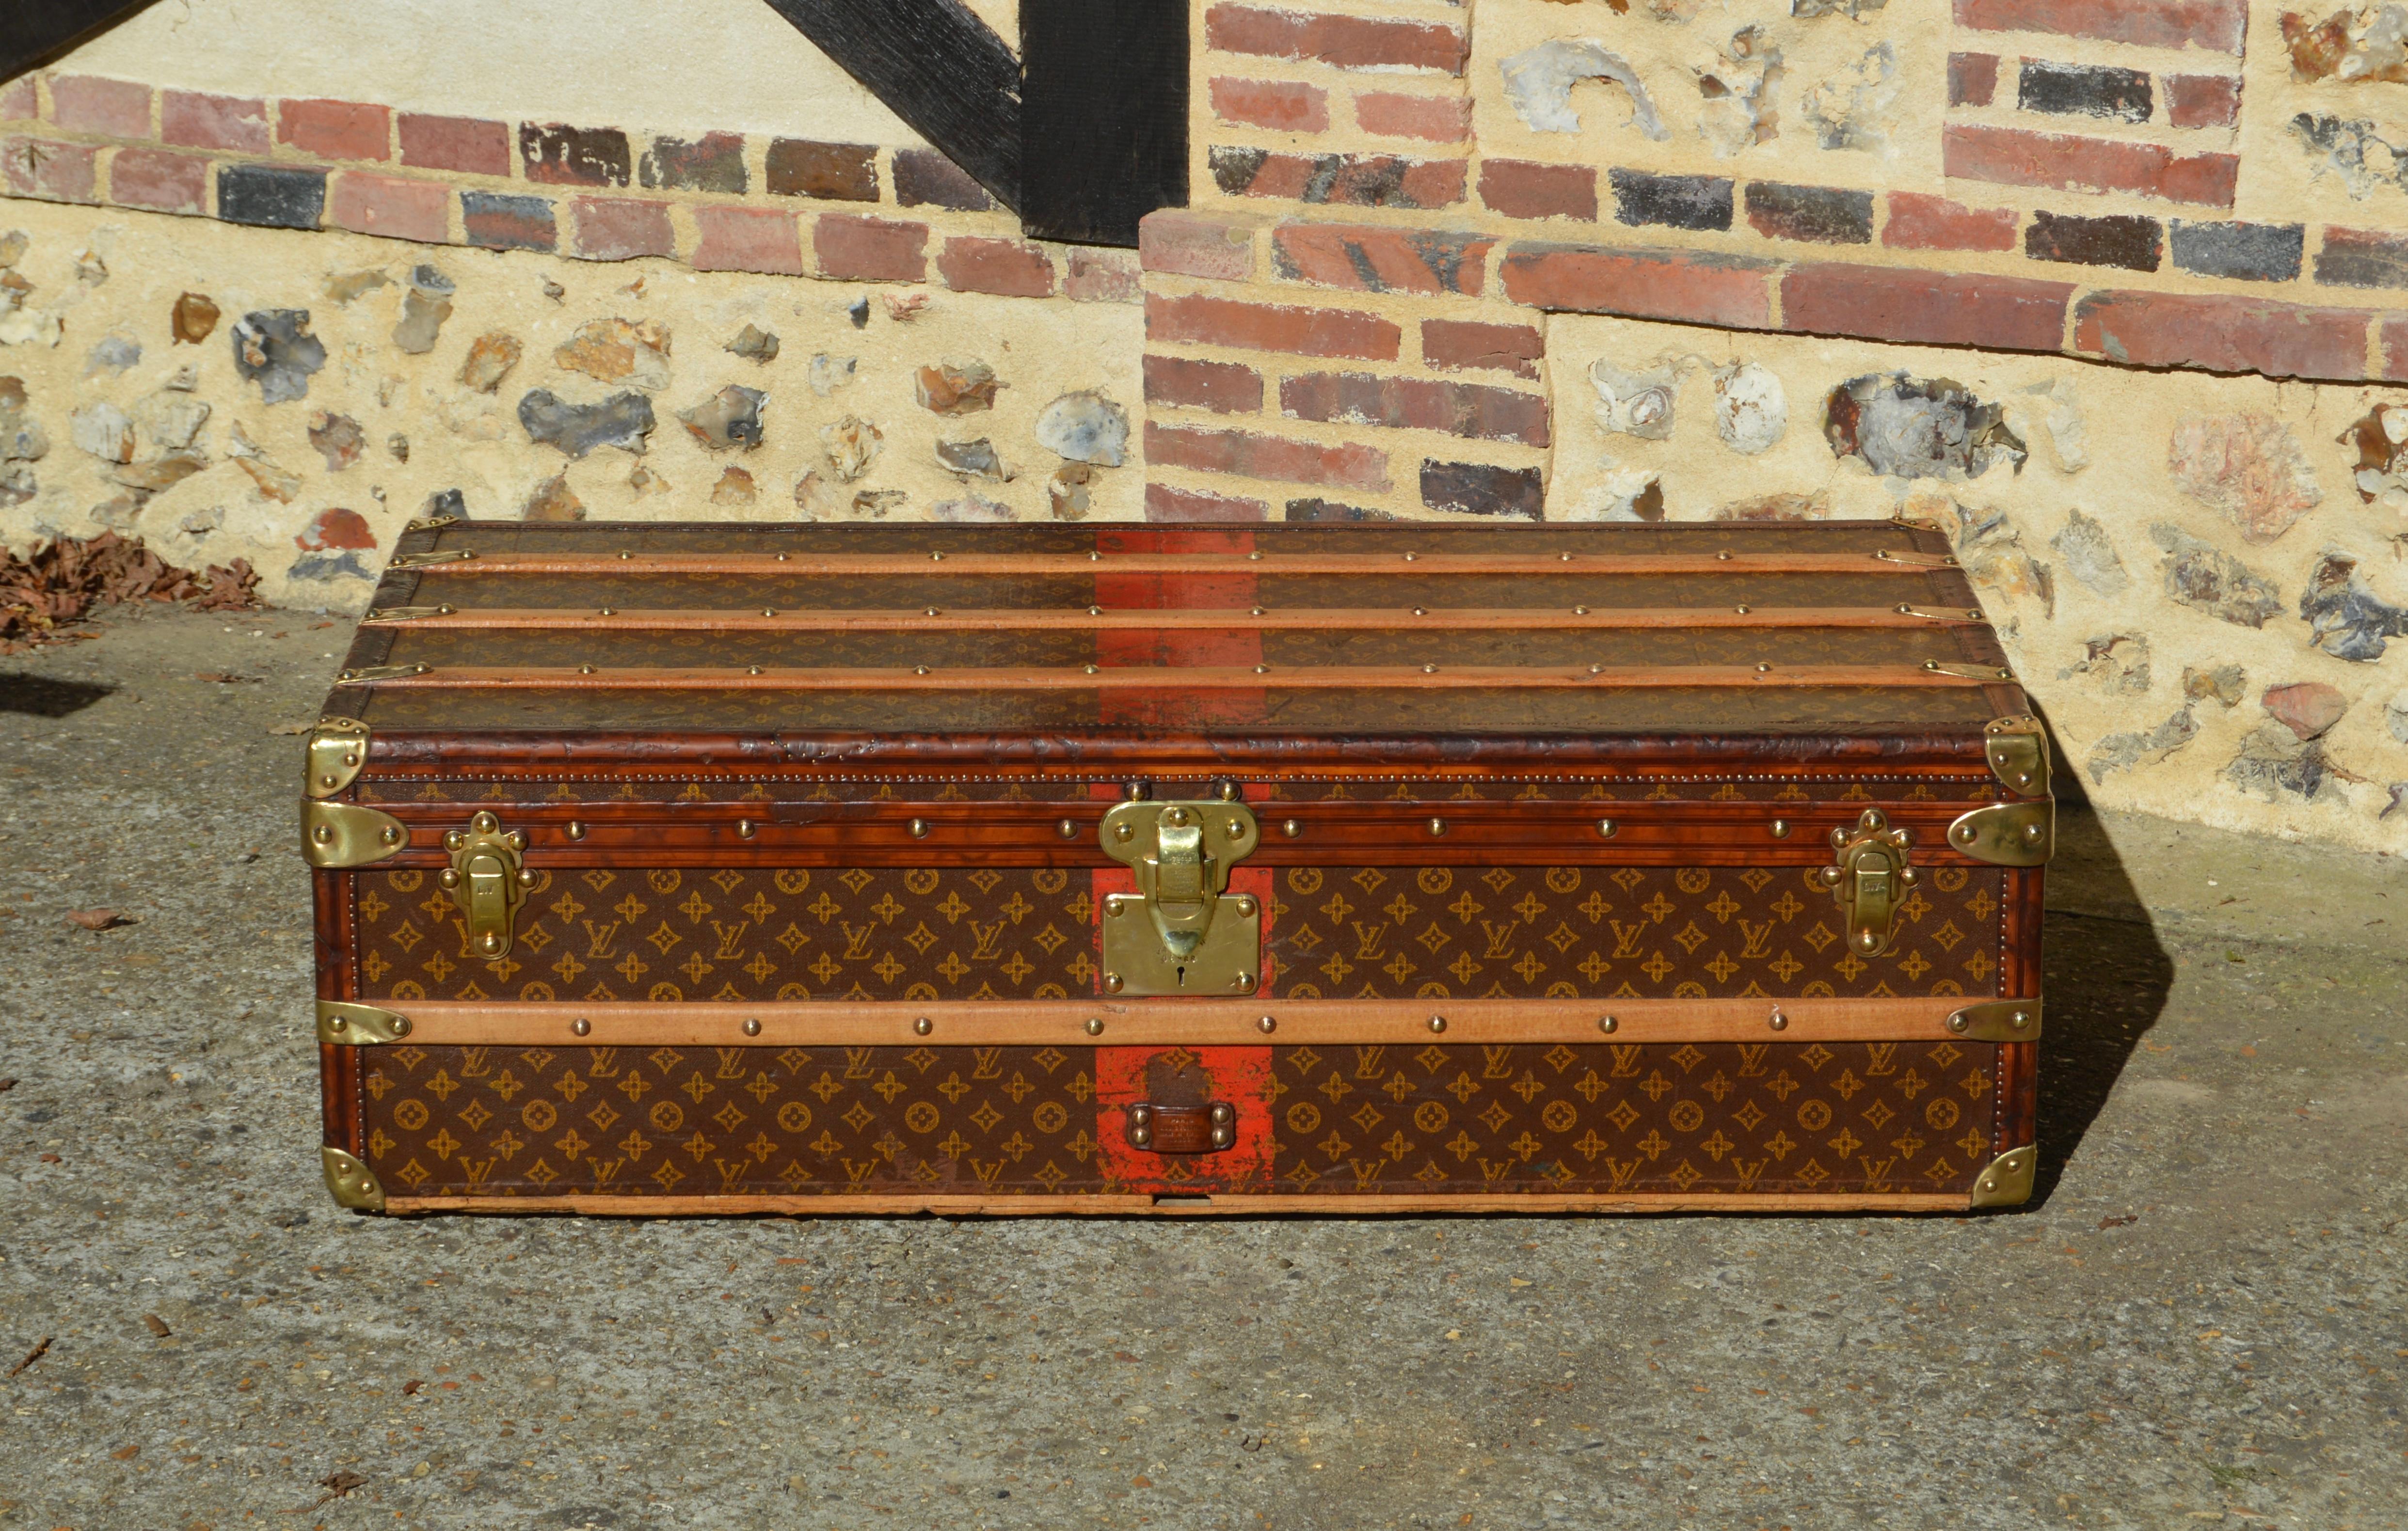 Rare Louis Vuitton Cabin Trunk from the 1910's in perfect condition, protected by leather edges, the most luxurious and fragile finish offered by Louis Vuitton until the 40's. Also included is the iconic stenciled monogram cotton canvas, as well as